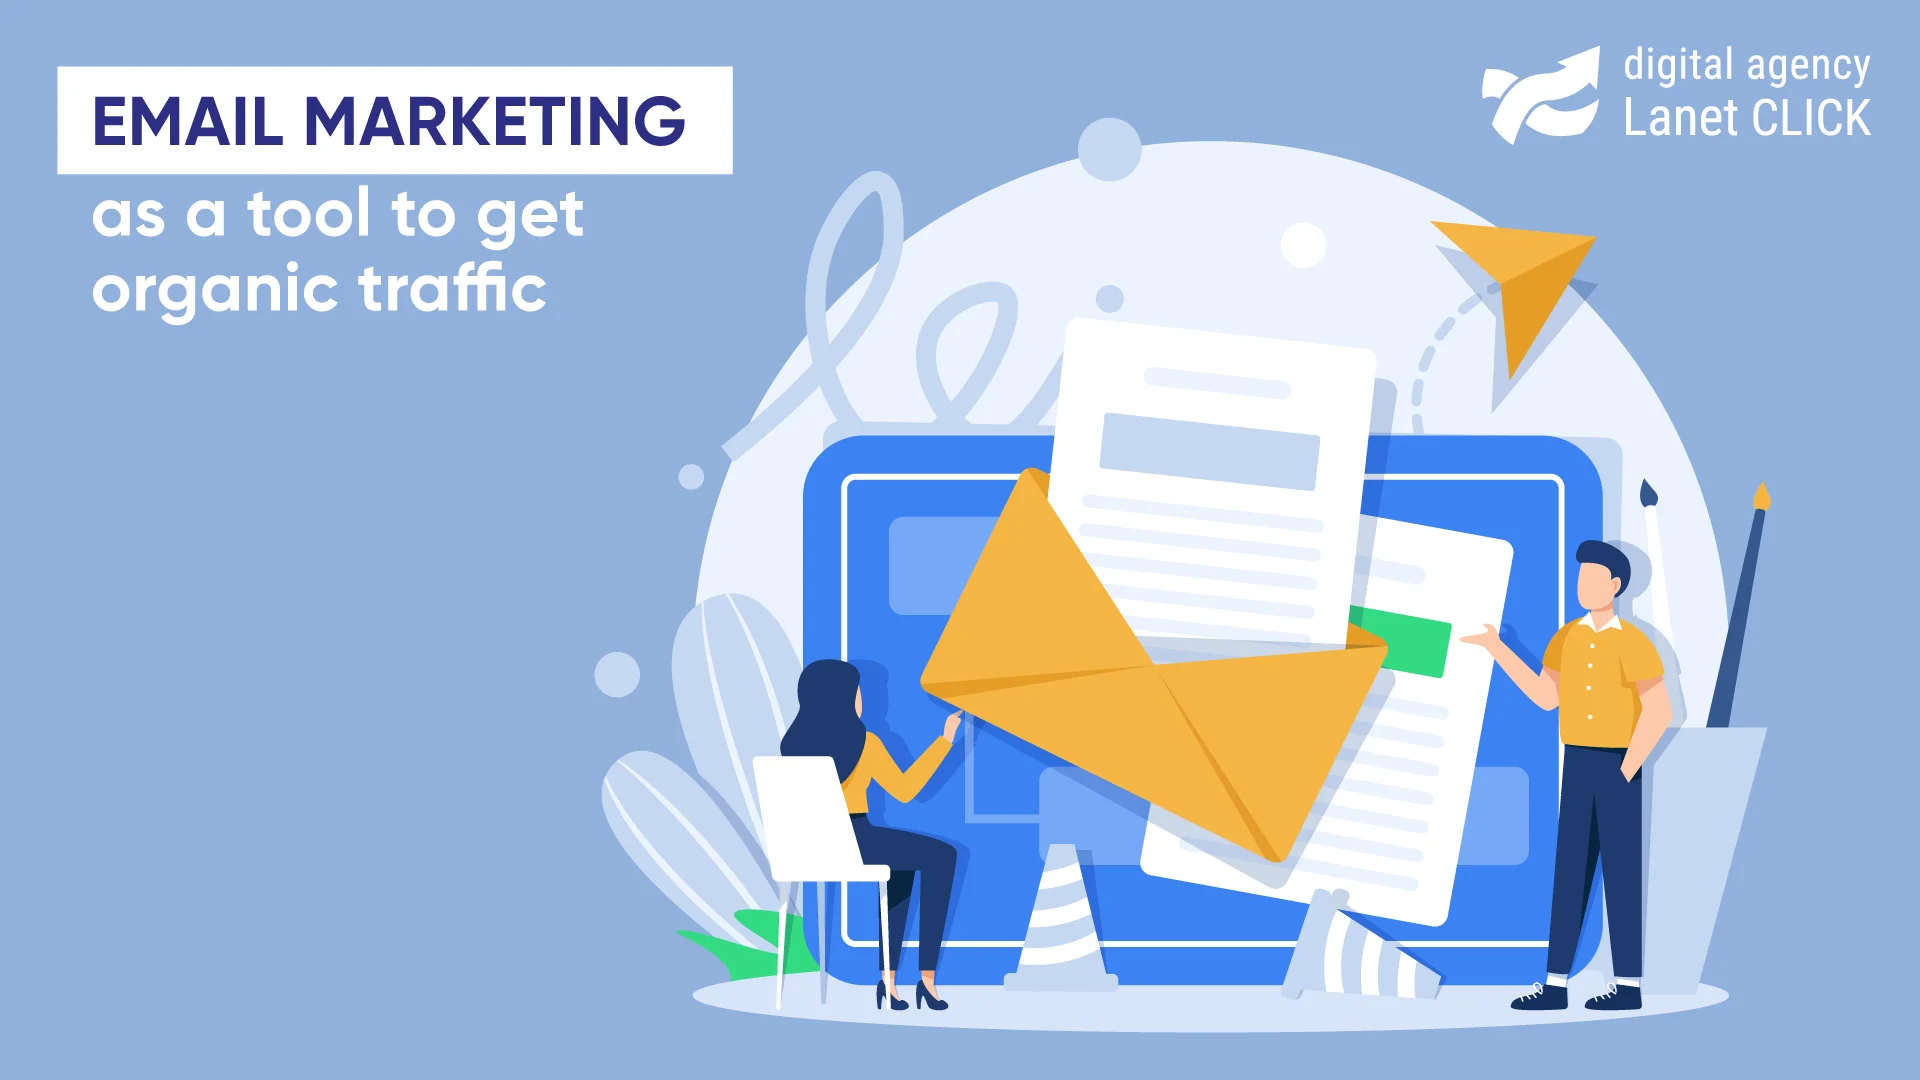 Email marketing as a tool to get organic traffic